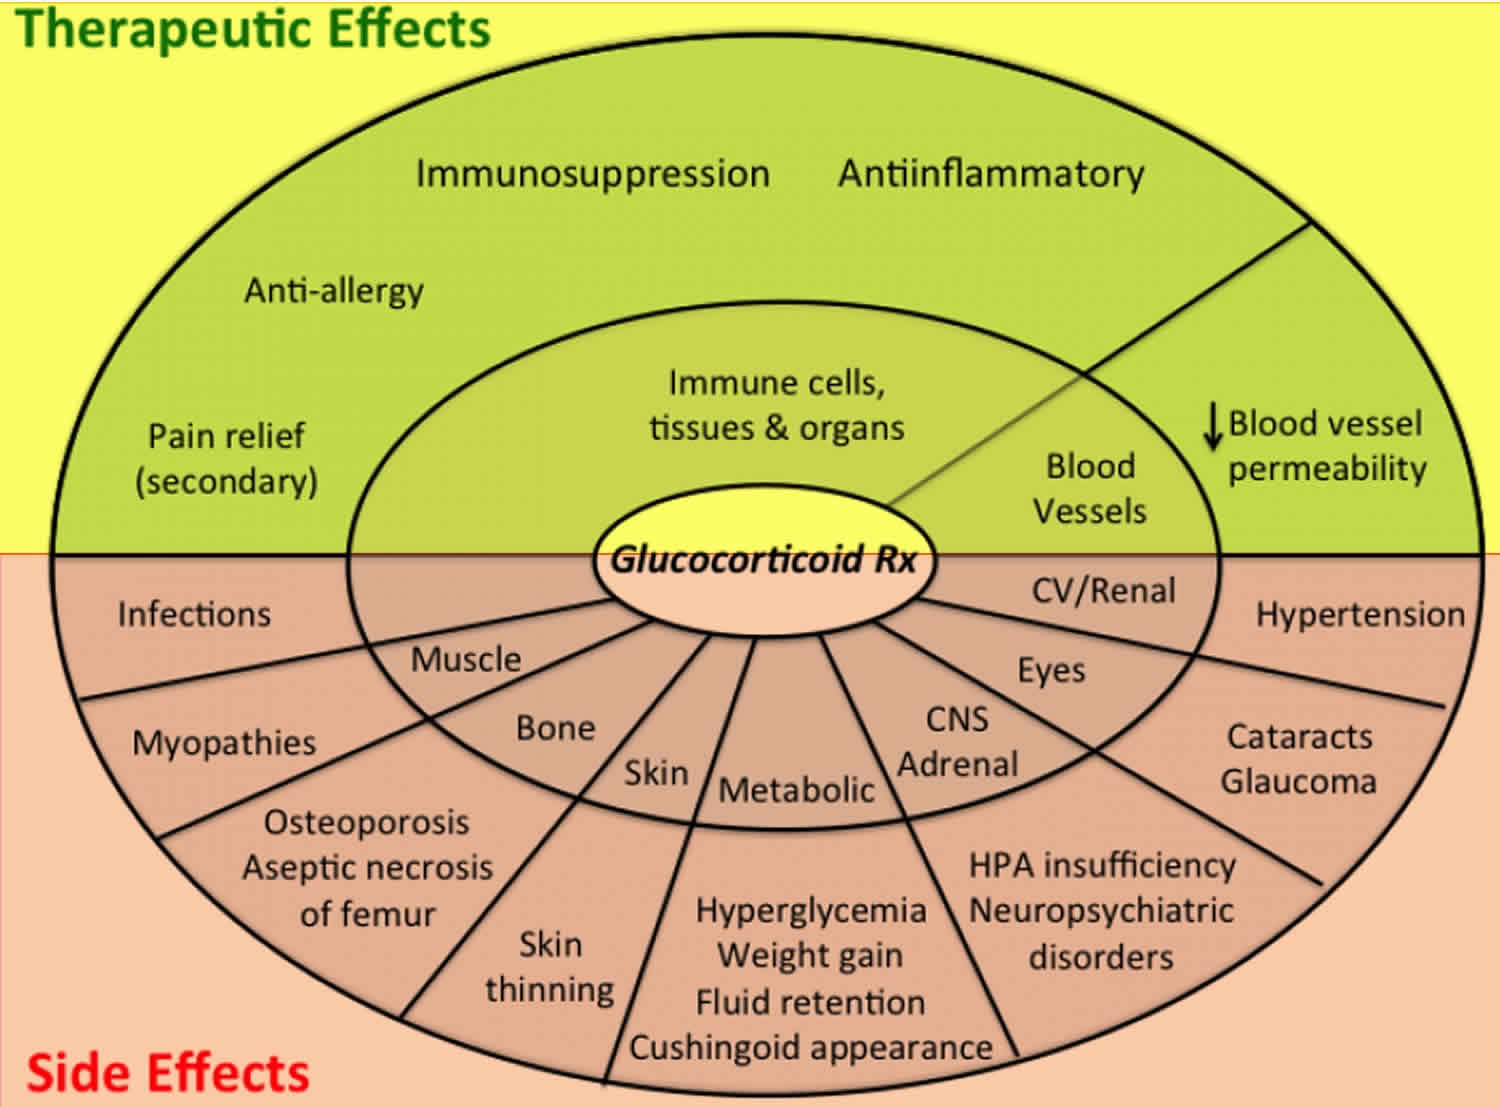 Glucocorticoid medications effects and side-effects